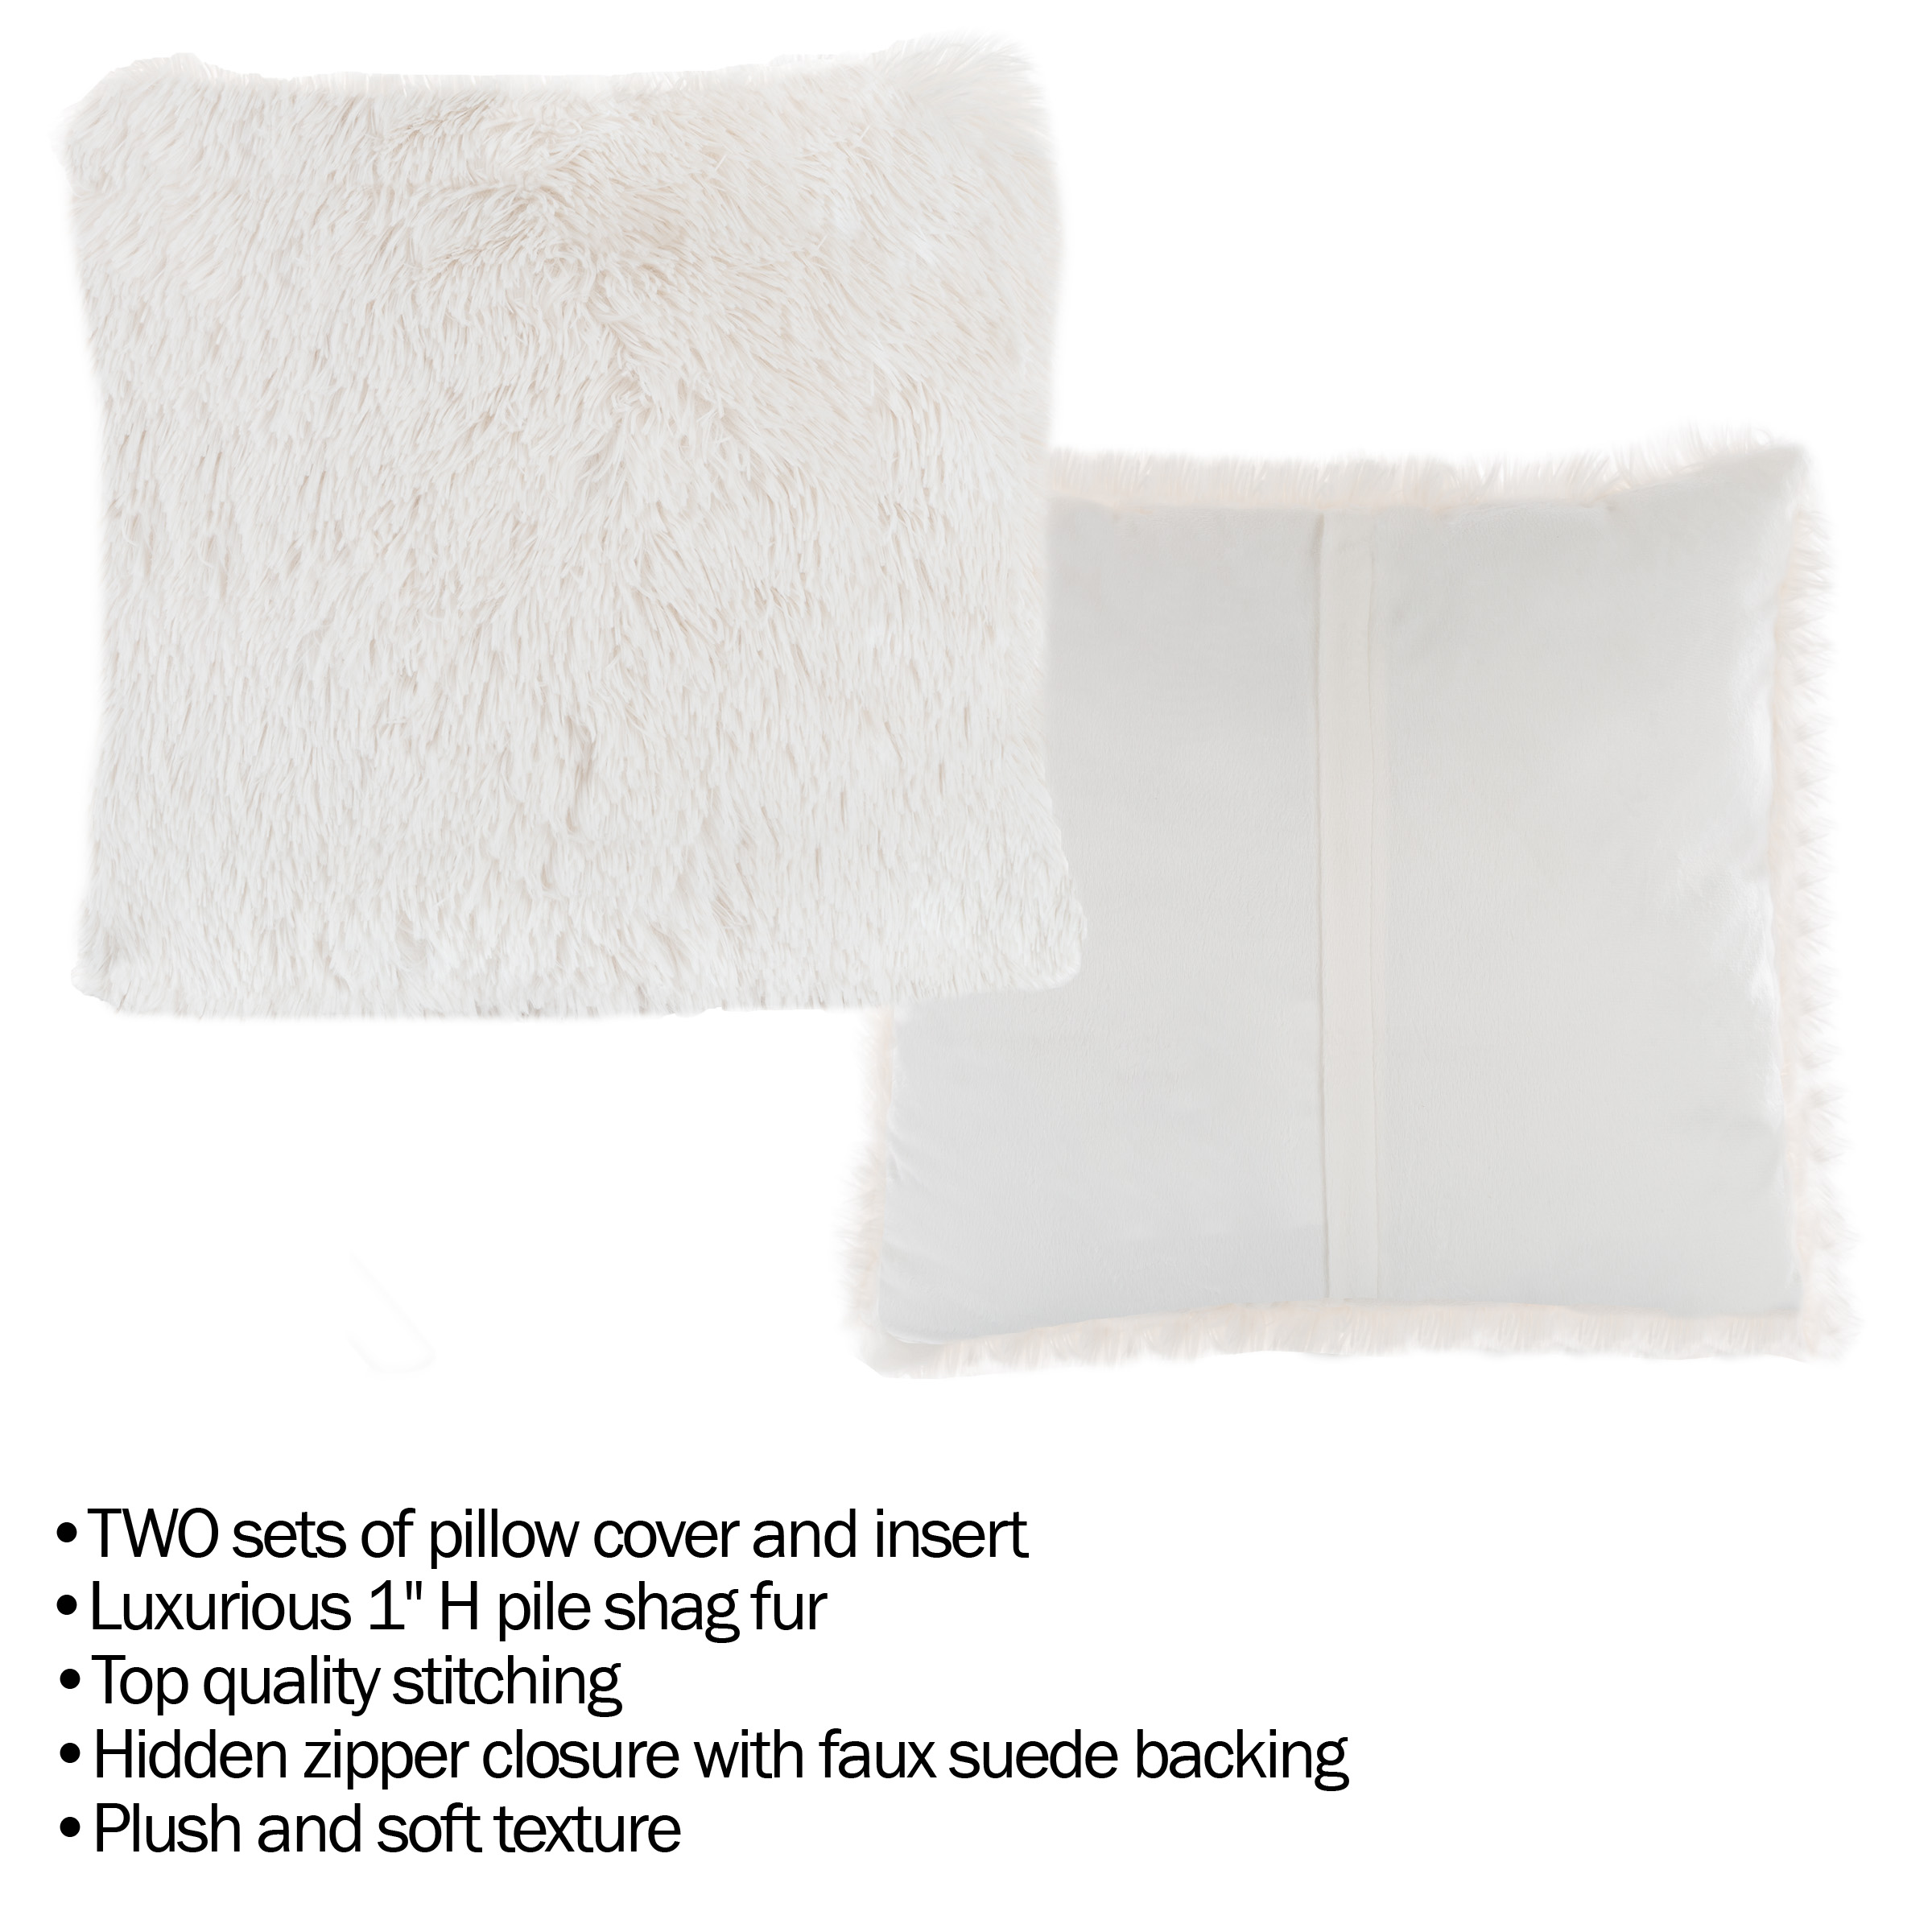 Somerset Home 2-Piece Faux Fur Pillow for Adults Covers & Inserts (White) - image 3 of 3